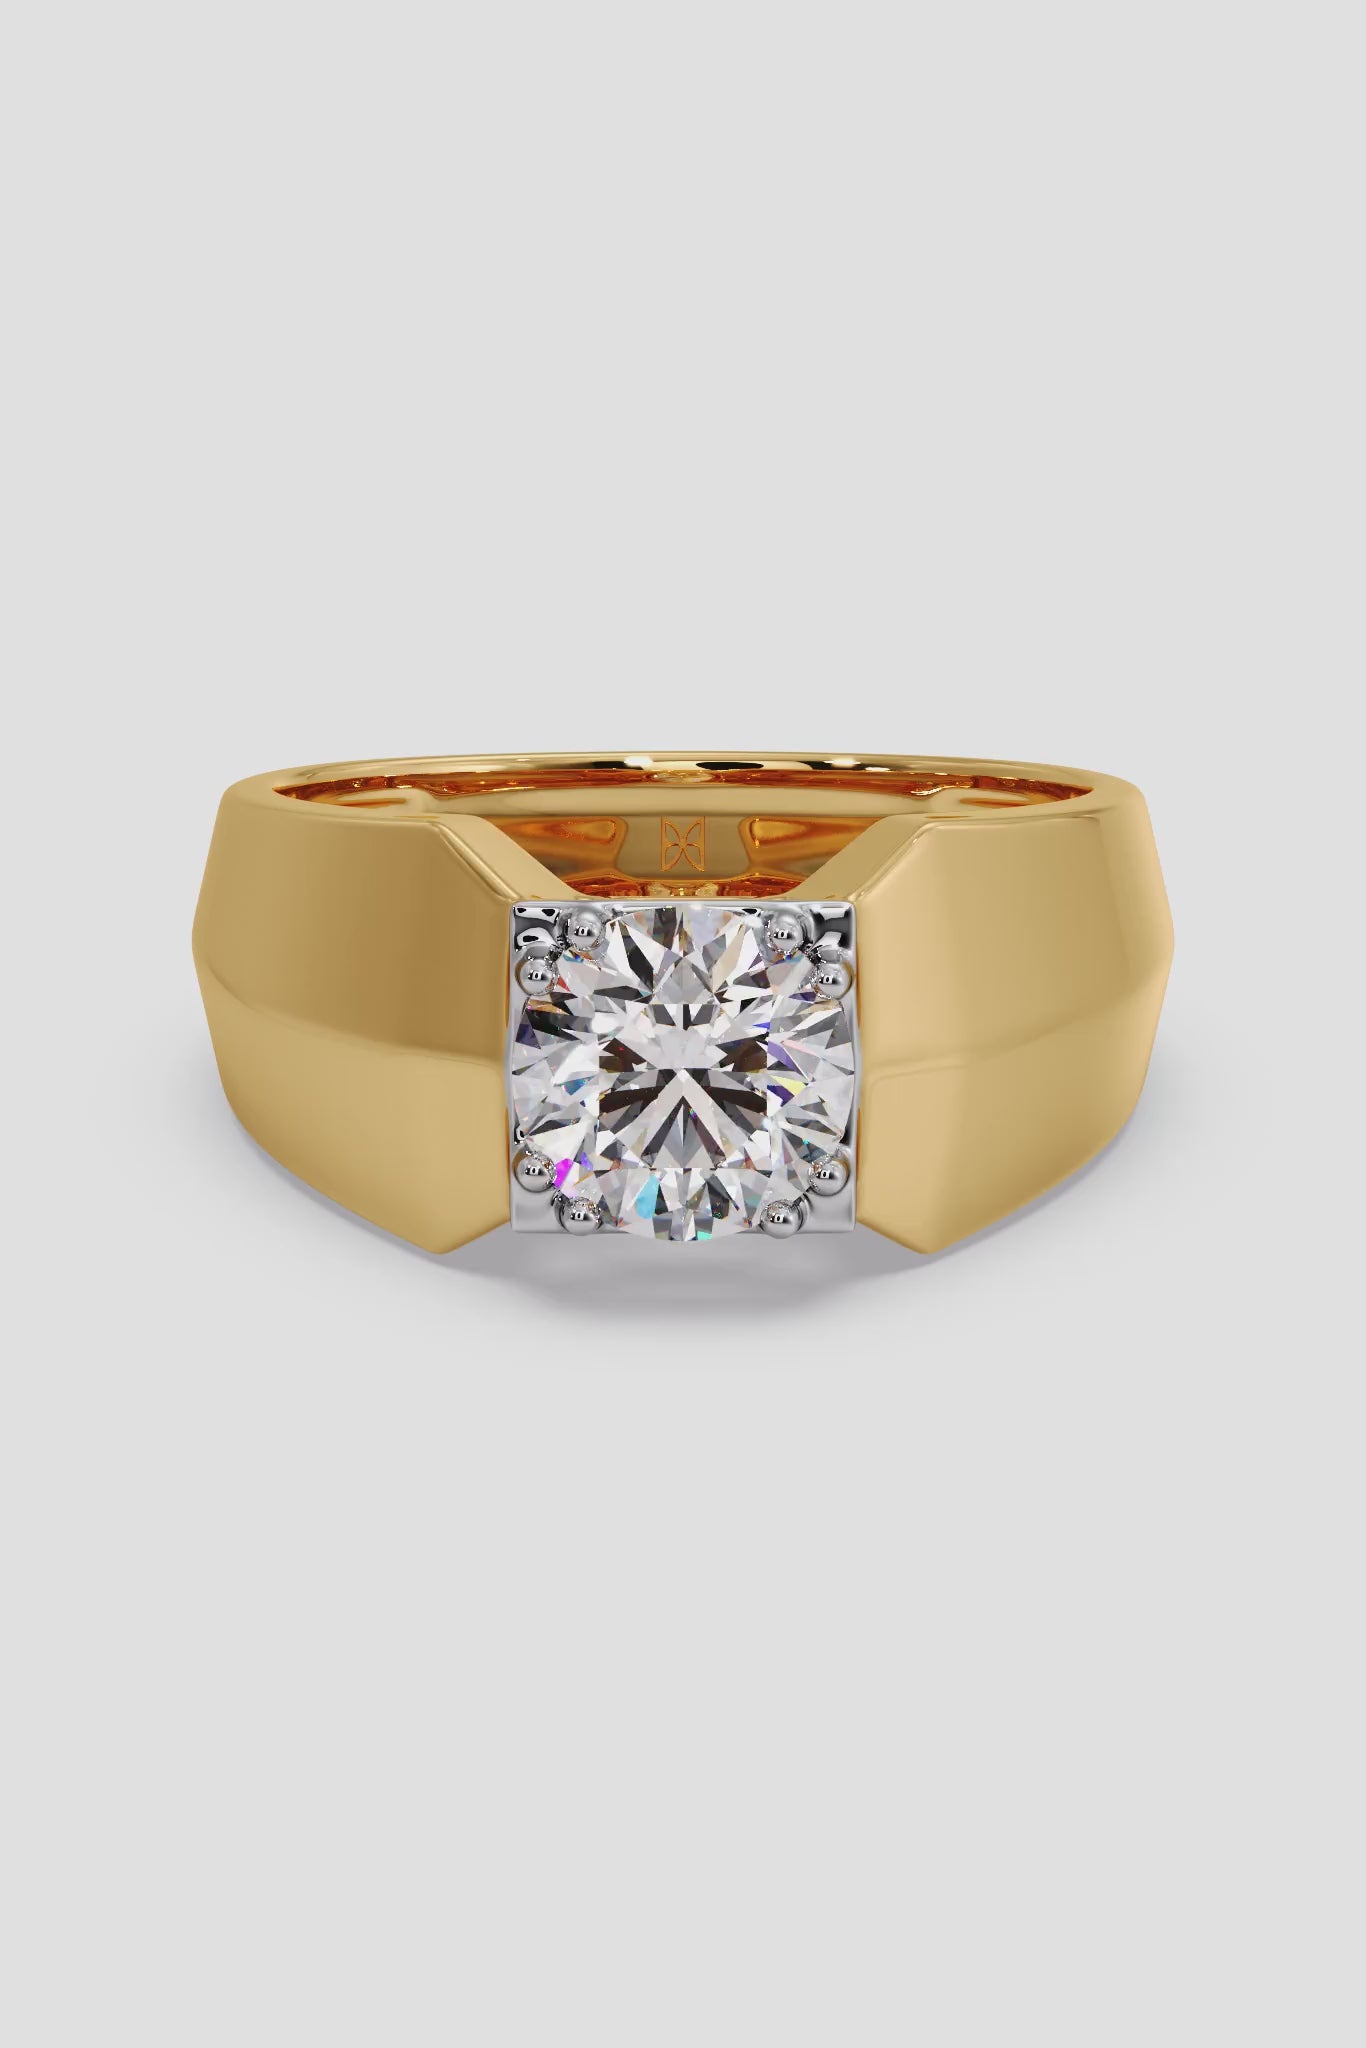 The Regal Solitaire Ring